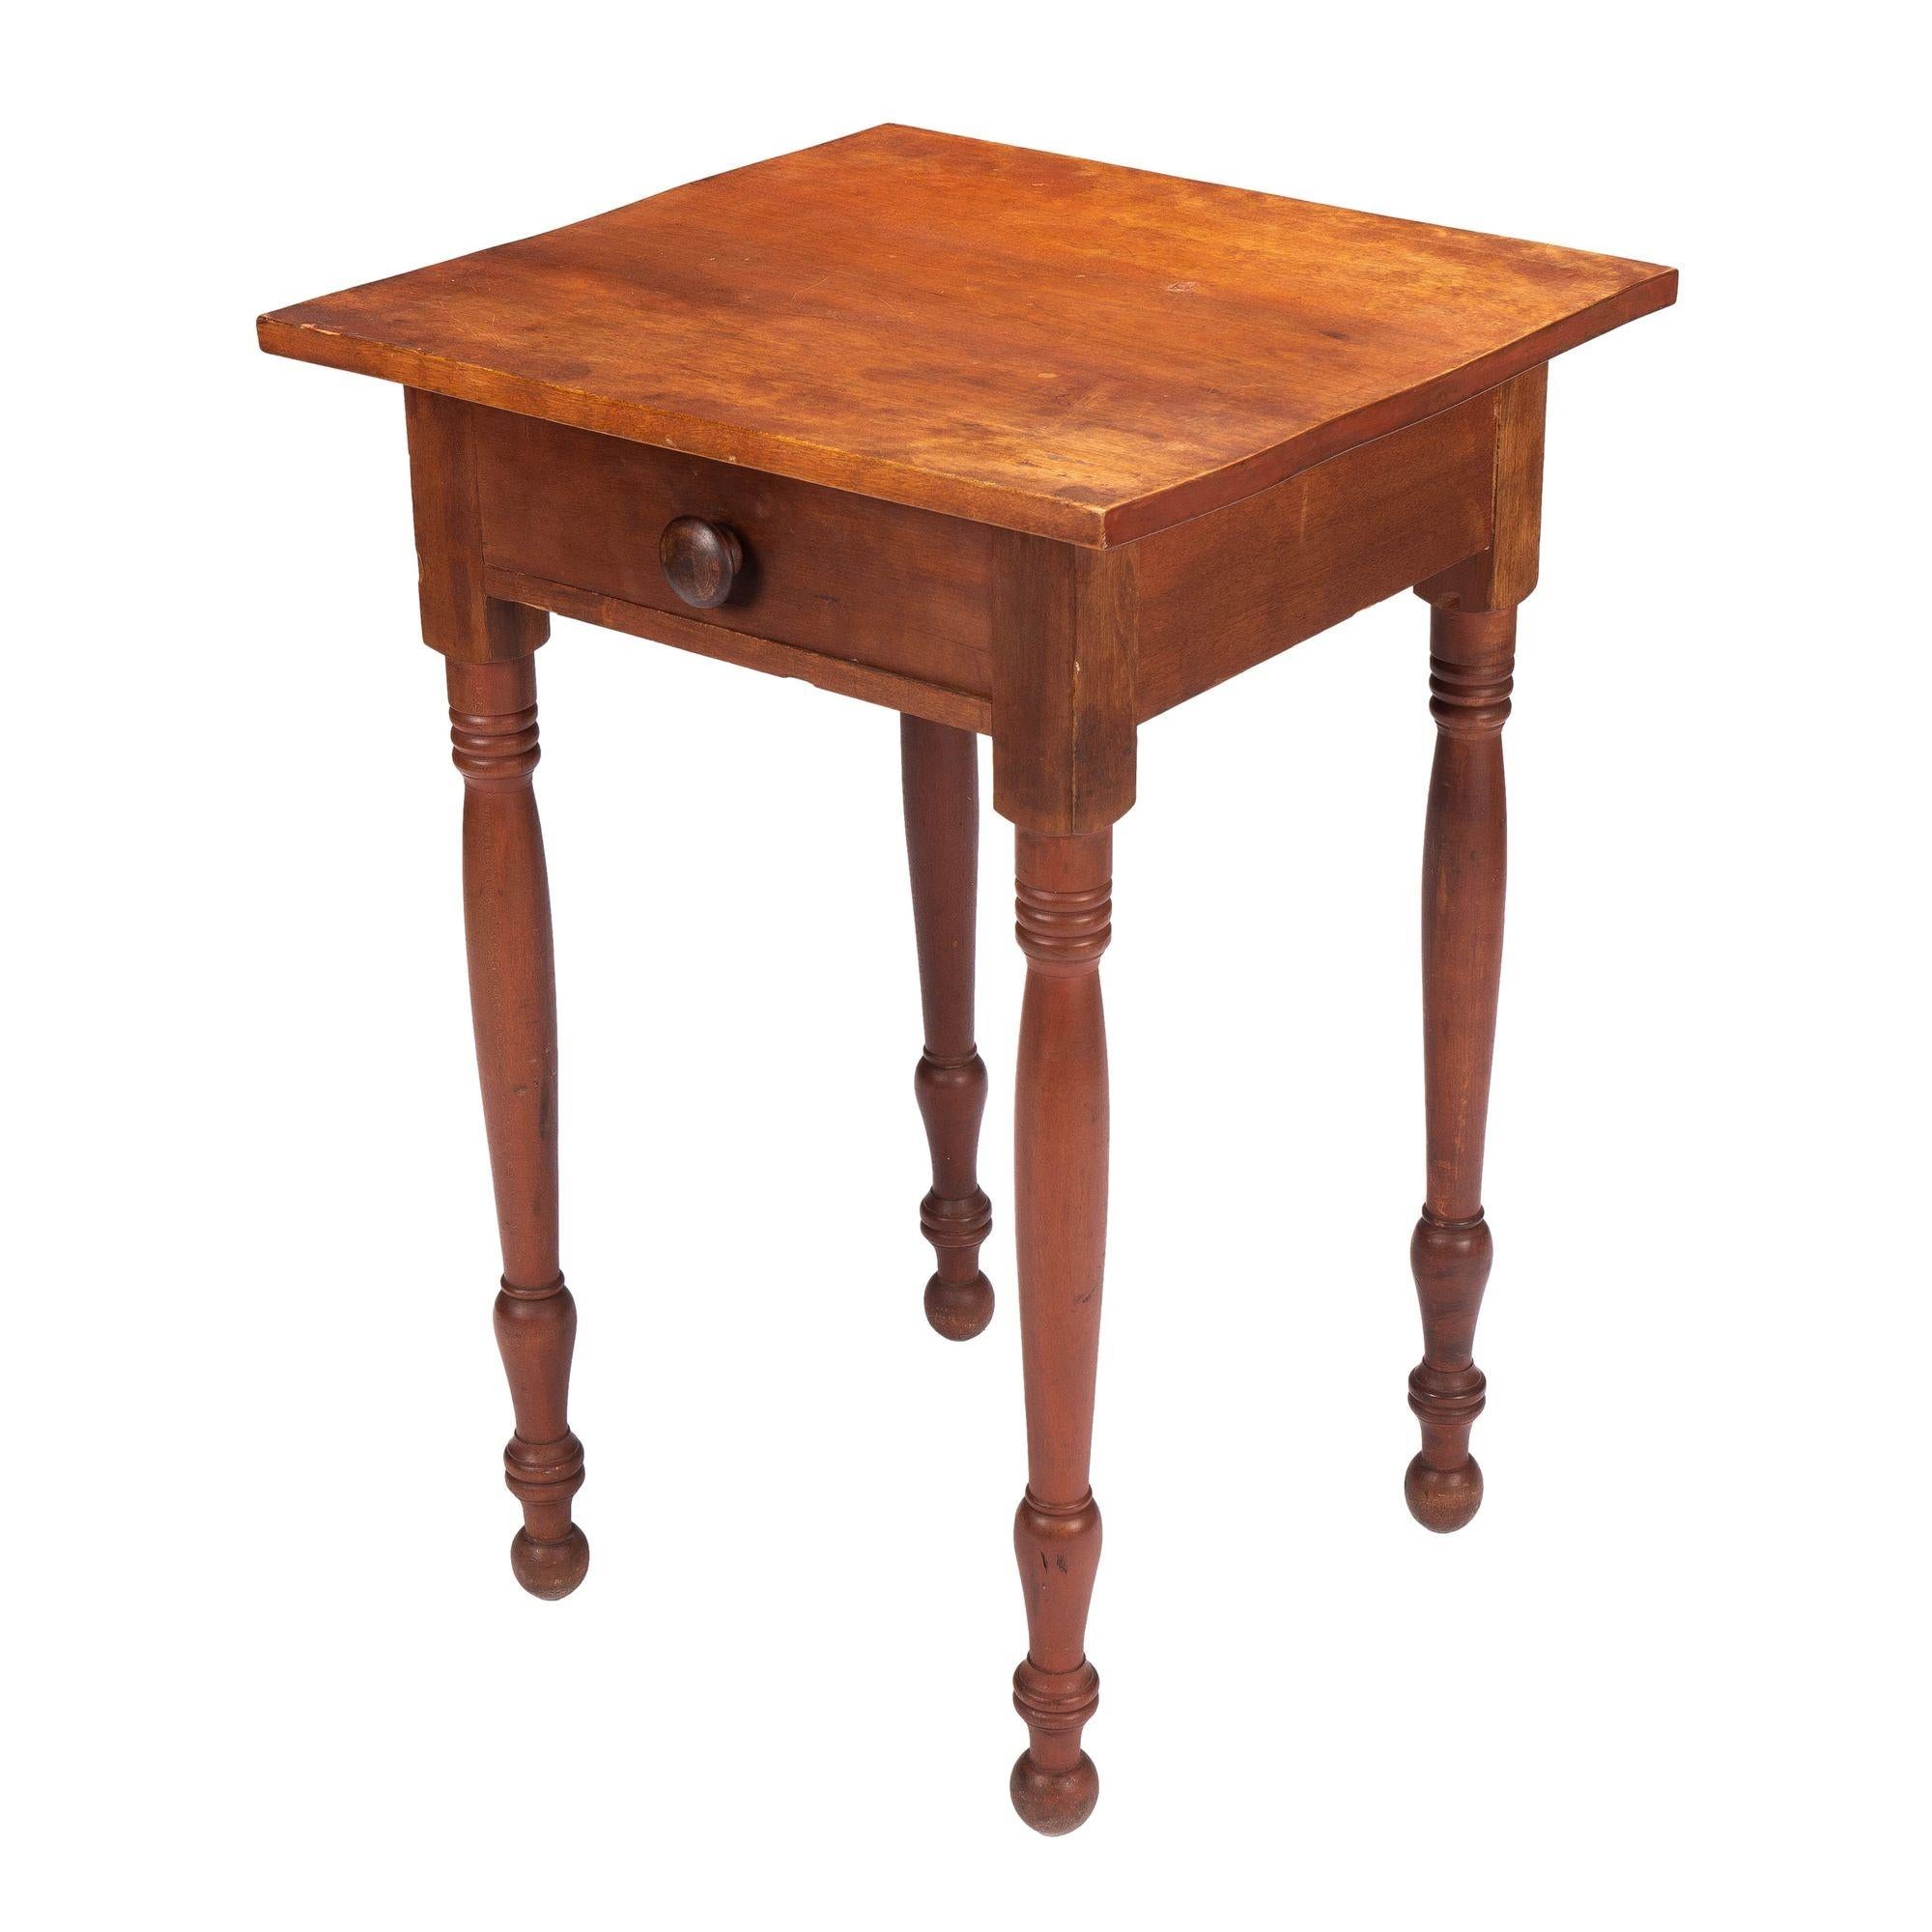 American country Sheraton one drawer stand. The square single board top is fitted to a conforming apron housing a single drawer with original mushroom knob. The square corner dies continue into stout simple turned legs terminating in ring and button